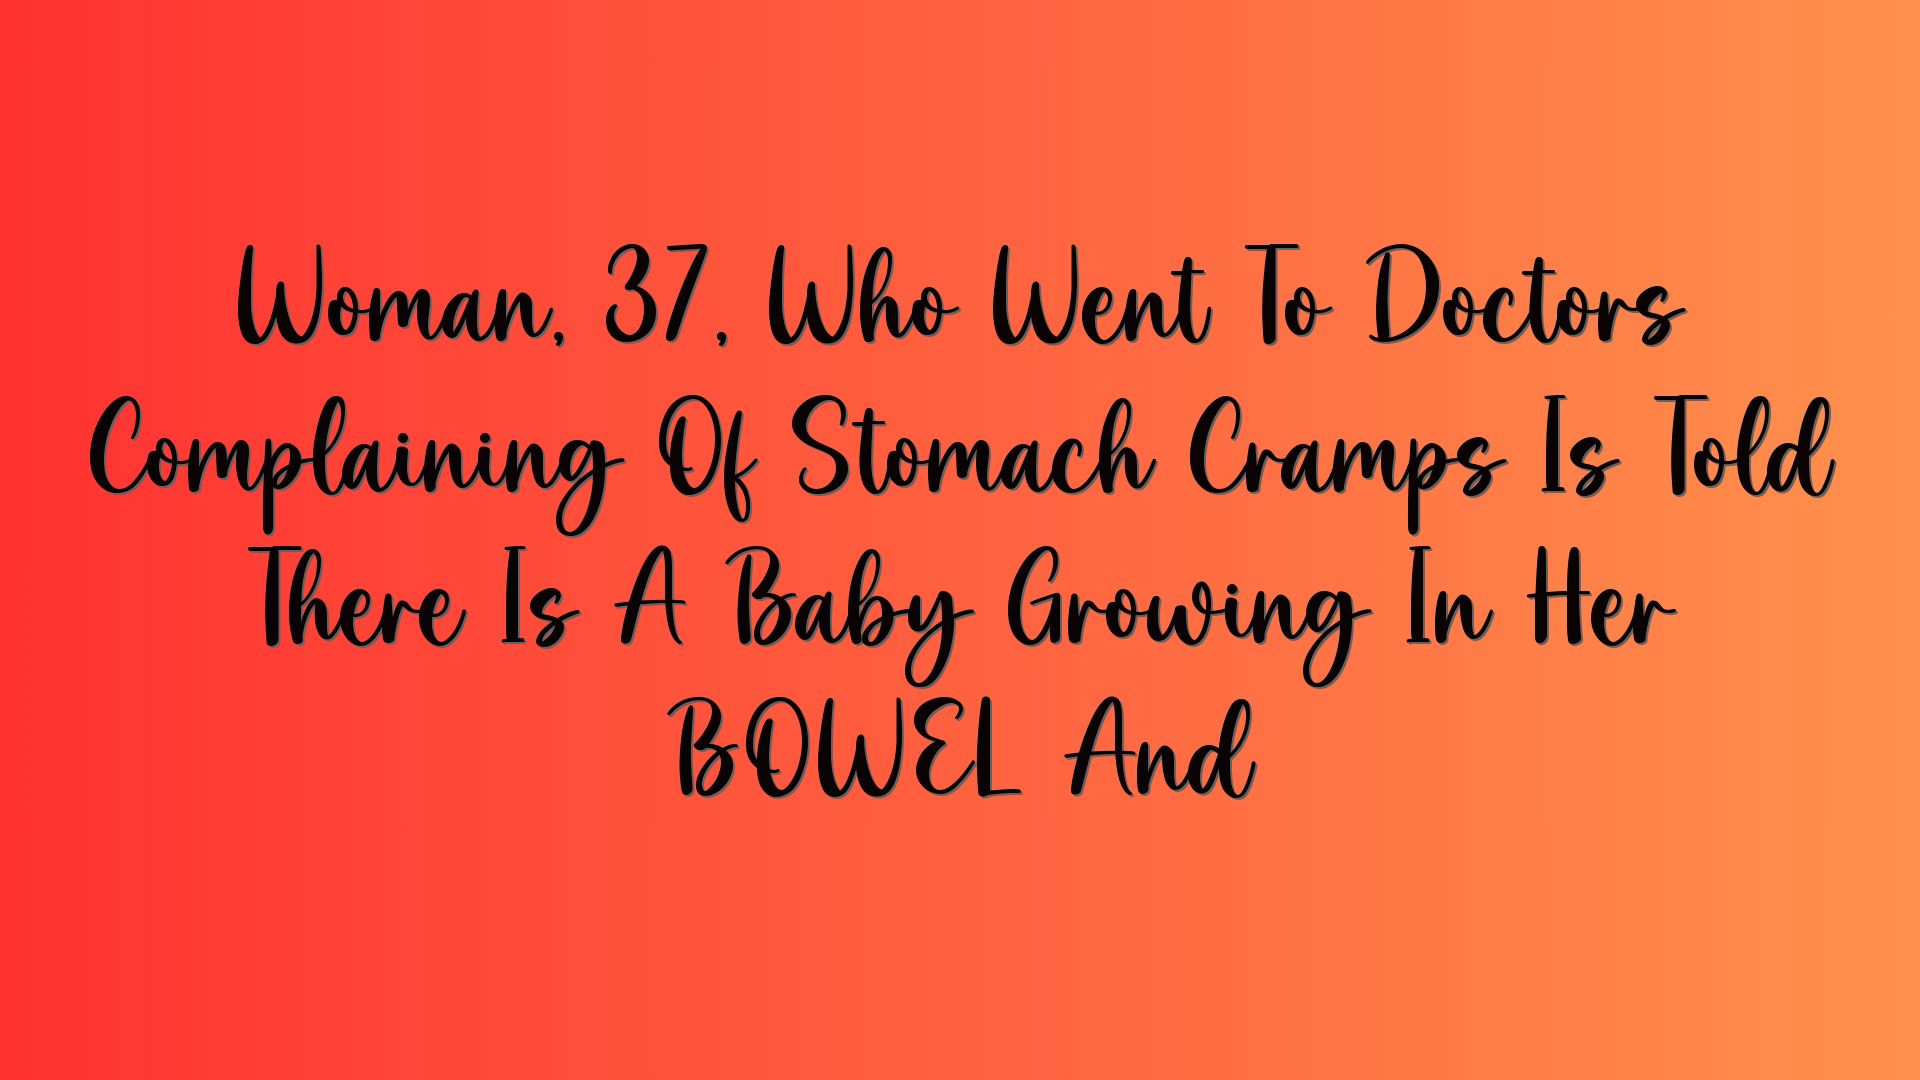 Woman, 37, Who Went To Doctors Complaining Of Stomach Cramps Is Told There Is A Baby Growing In Her BOWEL And